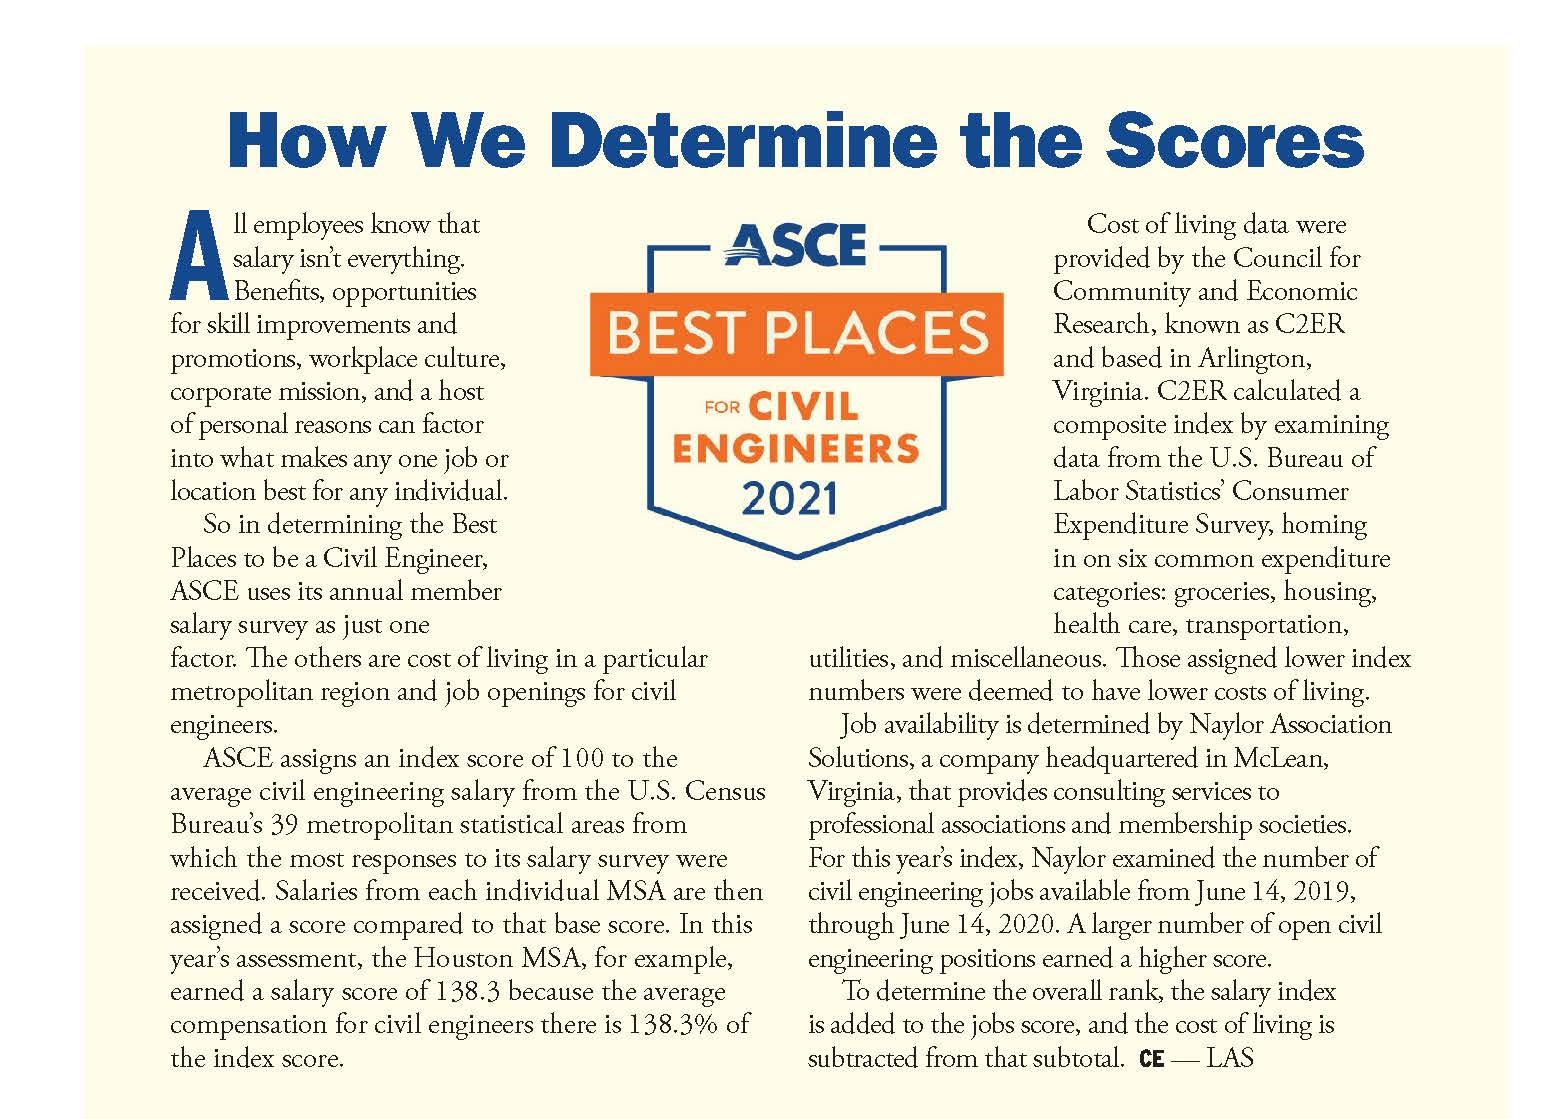 information showing how ASCE determined the best places to work scores